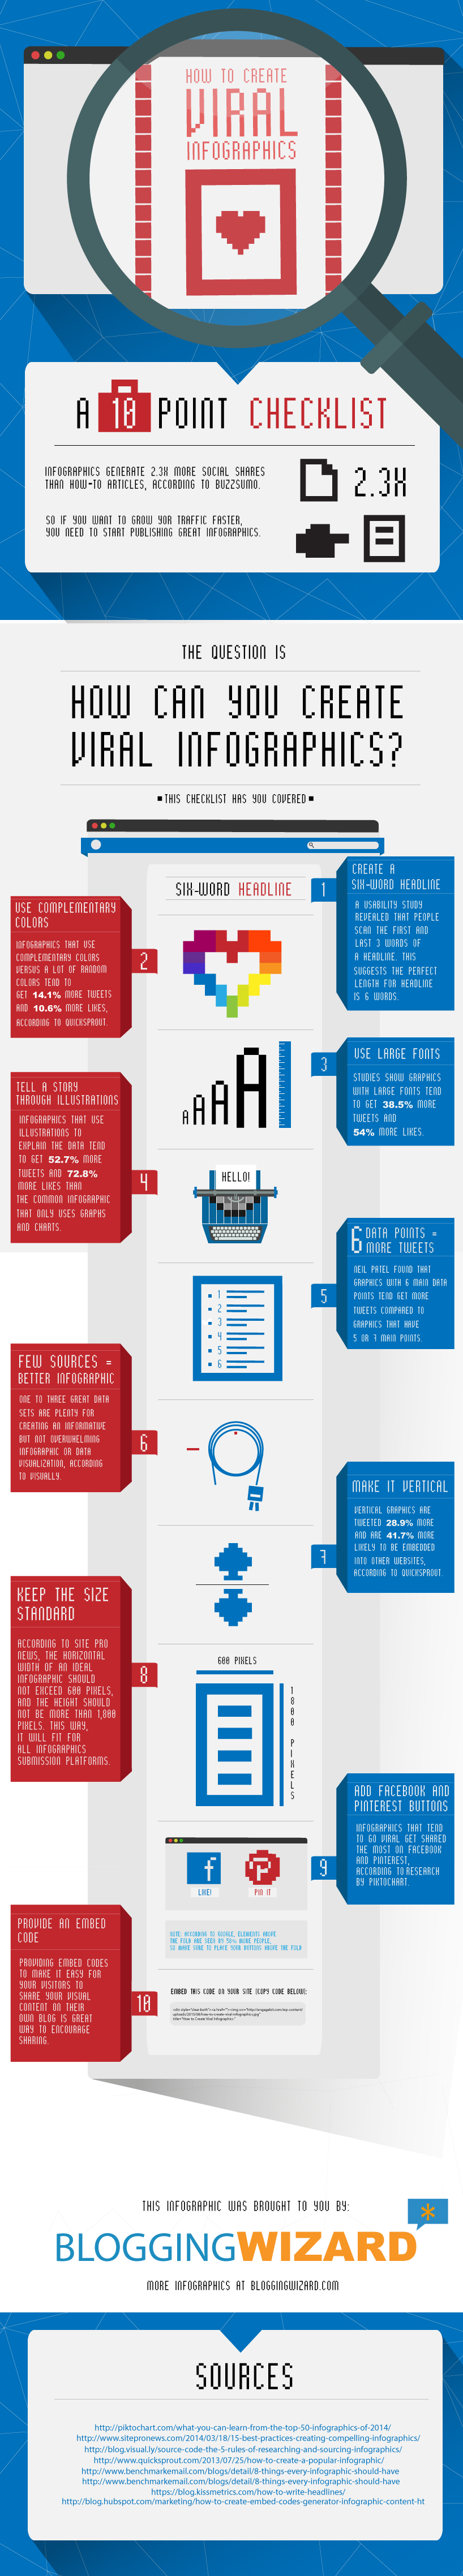 How-To-Create-Viral-Infographics-Full